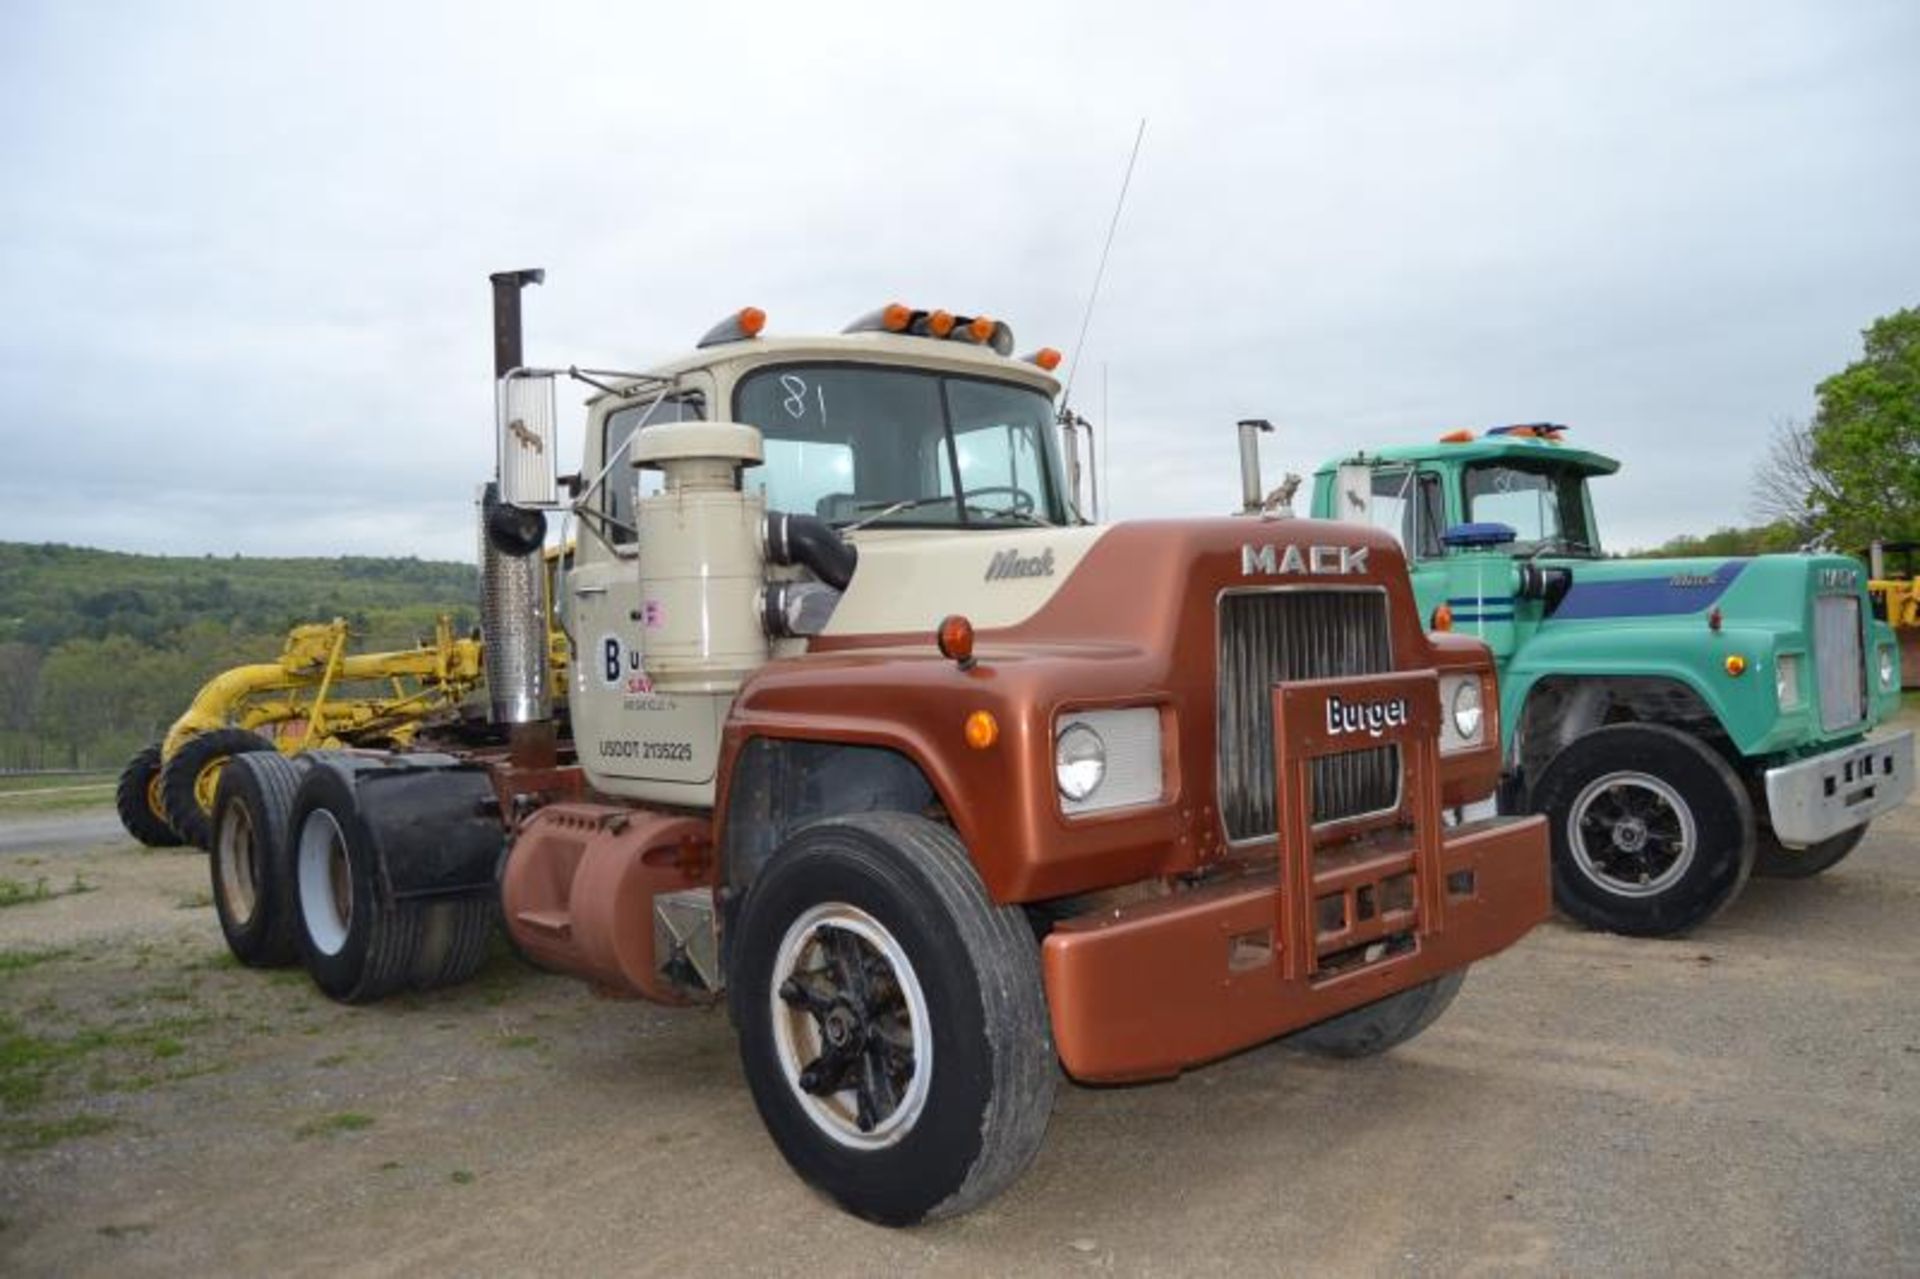 1978 MACK MODEL 686 DAY CAB ROAD TRACTOR W/ 10 SPEED TRANSMISSION/MACK ENGINE; W/ 708,948 MILES - Image 2 of 3